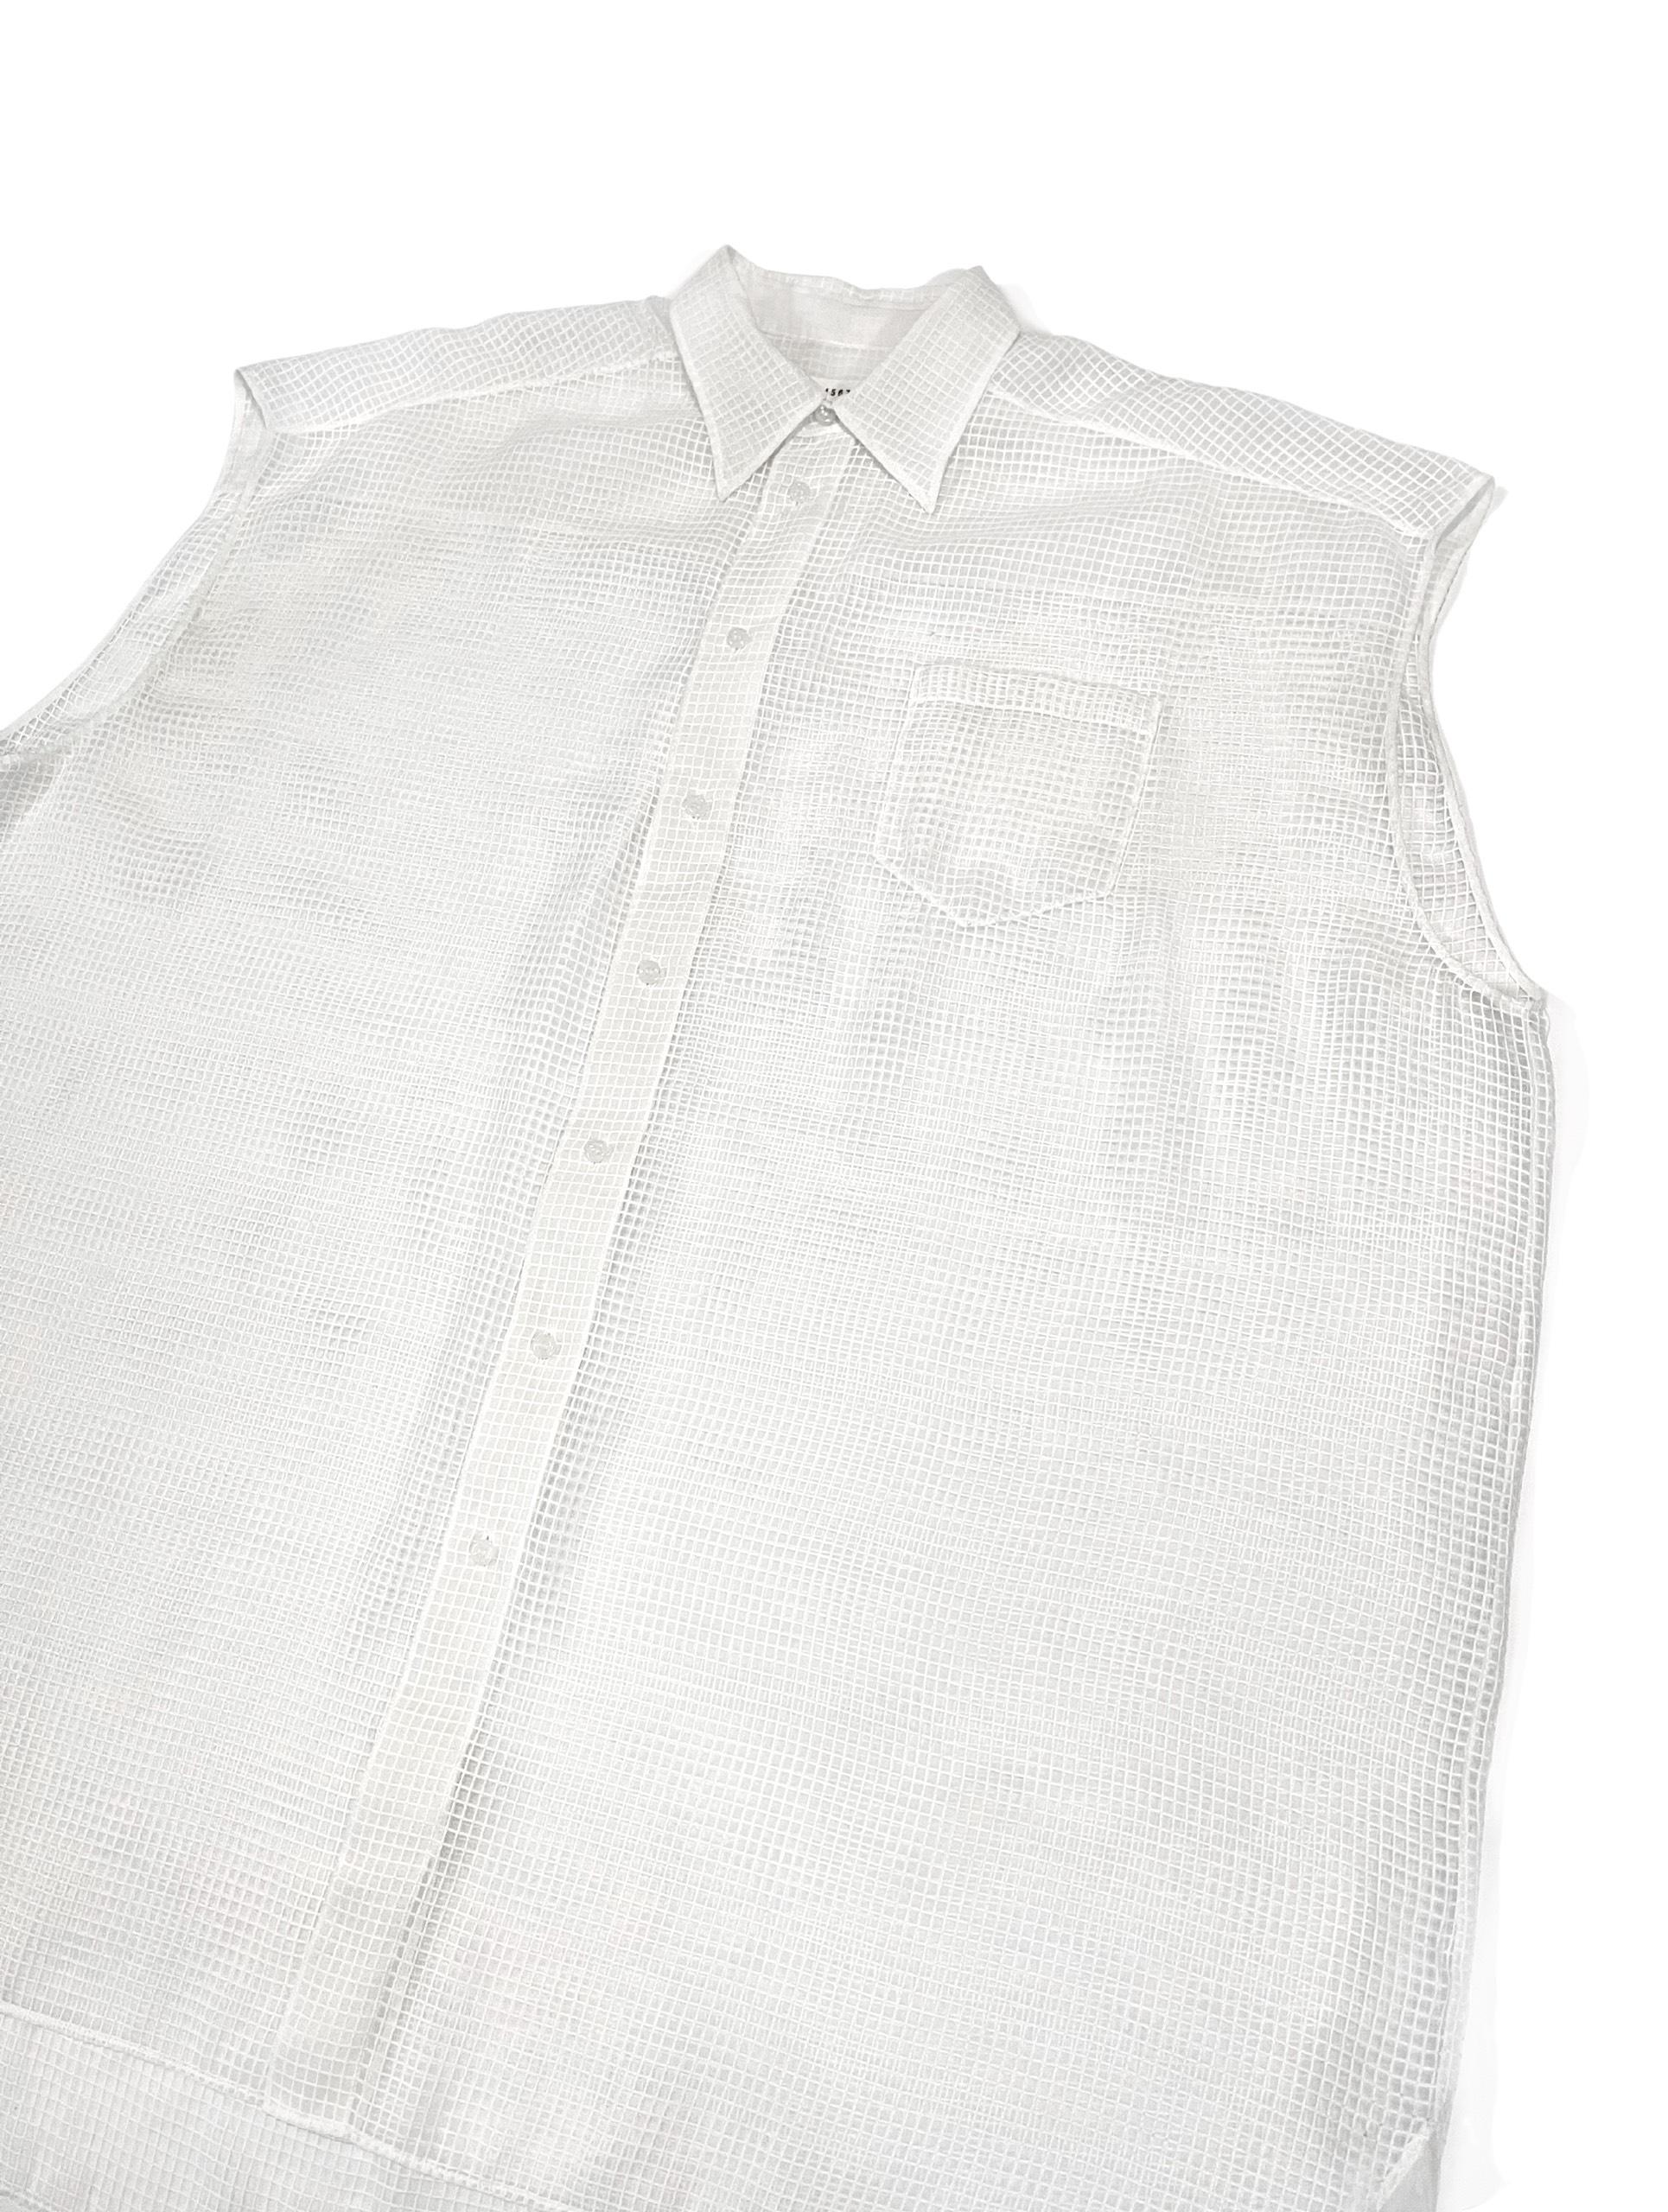 Maison Margiela S/S2020 Fish-Net Sleeveless Shirt In Excellent Condition For Sale In Seattle, WA